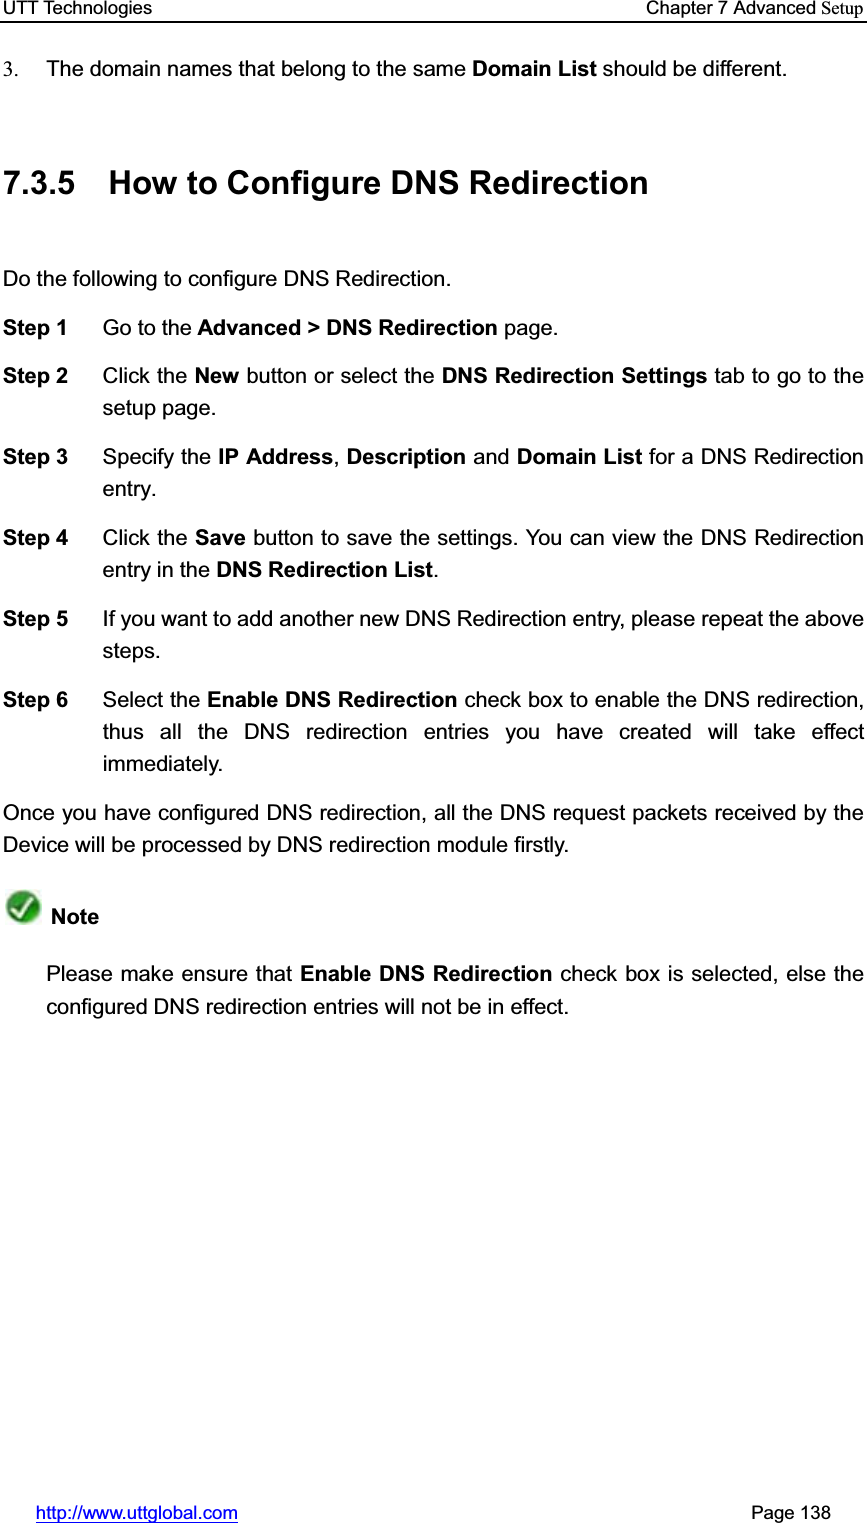 UTT Technologies    Chapter 7 Advanced Setuphttp://www.uttglobal.com                                                       Page 138 3.  The domain names that belong to the same Domain List should be different. 7.3.5  How to Configure DNS Redirection Do the following to configure DNS Redirection.   Step 1  Go to the Advanced &gt; DNS Redirection page. Step 2  Click the New button or select the DNS Redirection Settings tab to go to the setup page. Step 3  Specify the IP Address,Description and Domain List for a DNS Redirection entry. Step 4  Click the Save button to save the settings. You can view the DNS Redirection entry in the DNS Redirection List.Step 5  If you want to add another new DNS Redirection entry, please repeat the above steps. Step 6  Select the Enable DNS Redirection check box to enable the DNS redirection, thus all the DNS redirection entries you have created will take effect immediately. Once you have configured DNS redirection, all the DNS request packets received by the Device will be processed by DNS redirection module firstly.   NotePlease make ensure that Enable DNS Redirection check box is selected, else the configured DNS redirection entries will not be in effect. 